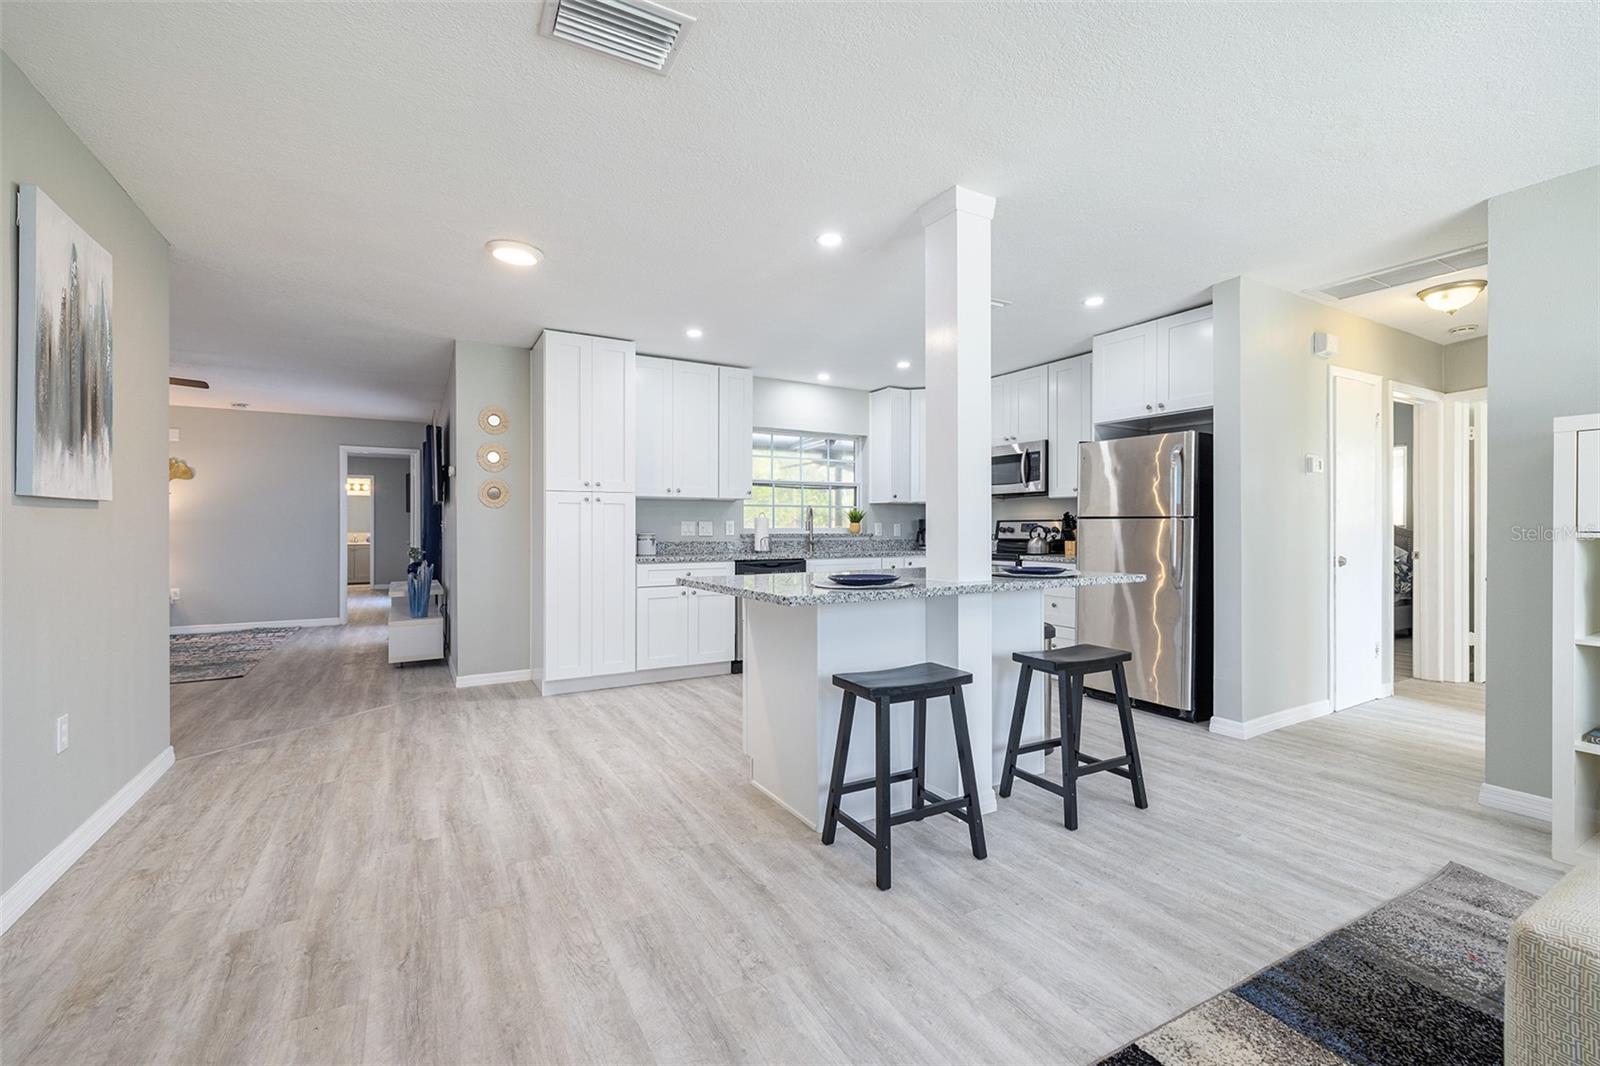 Modern Kitchen with shaker cabinets, granite counter tops, and stainless steel appliances